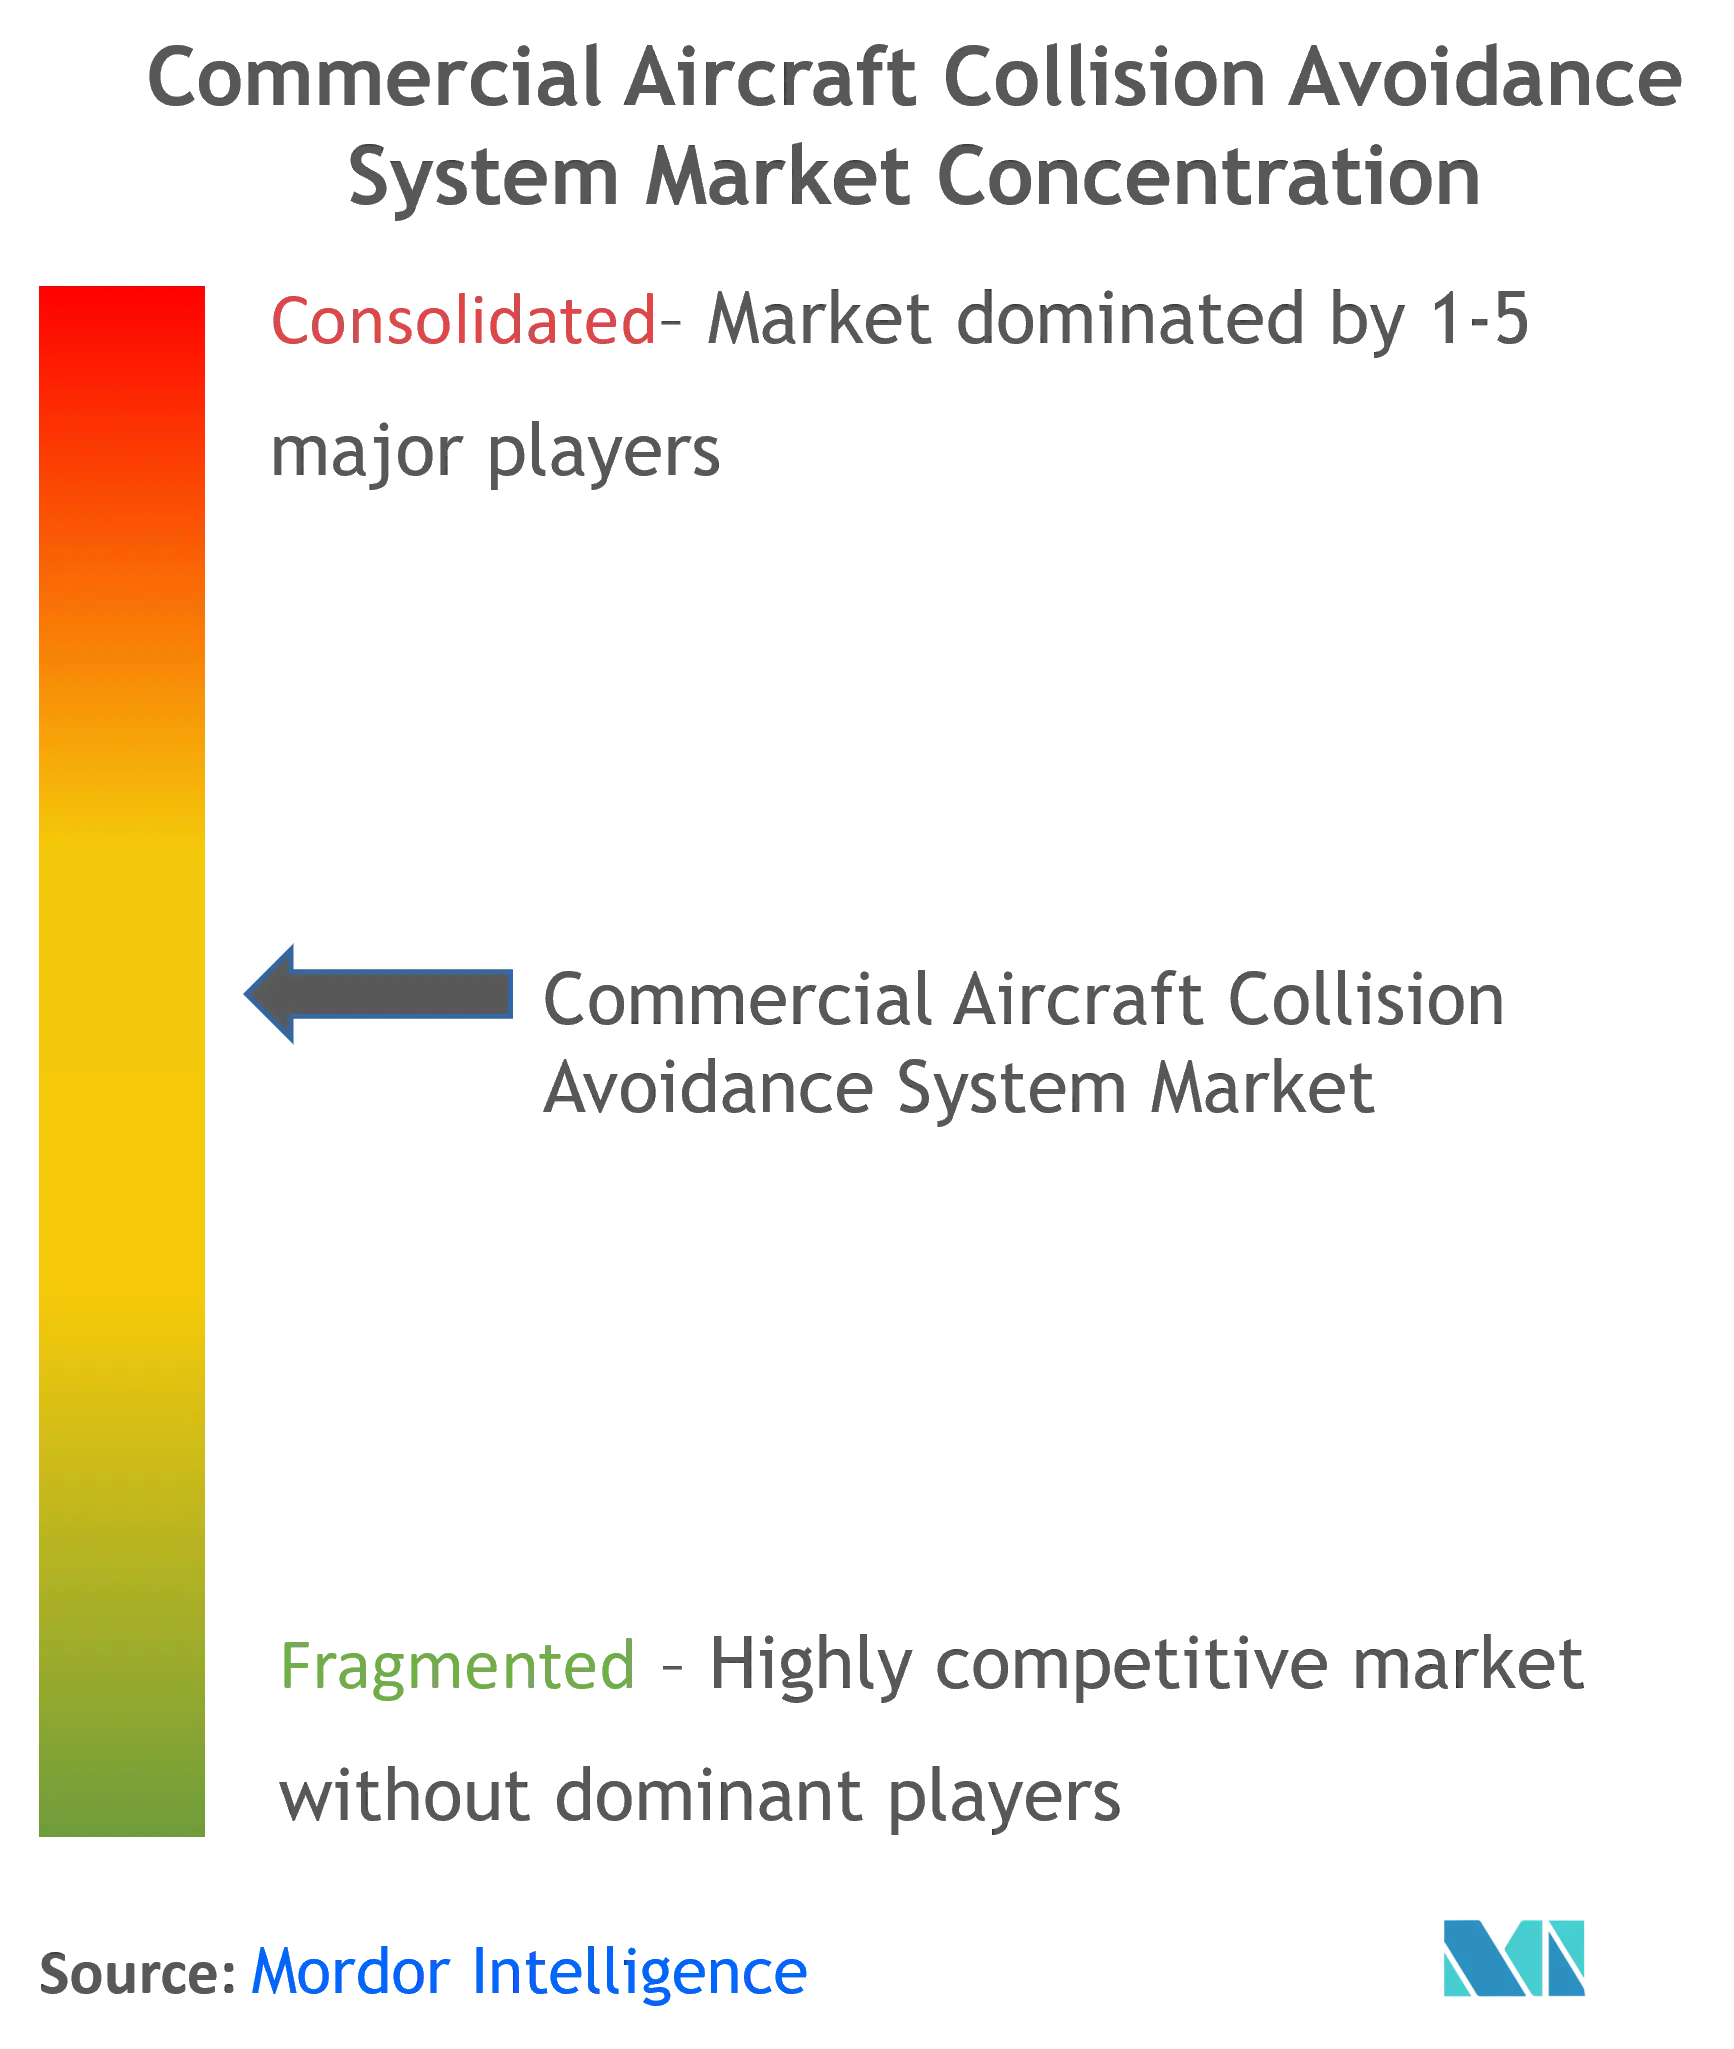 Commercial Aircraft Collision Avoidance System Market Concentration